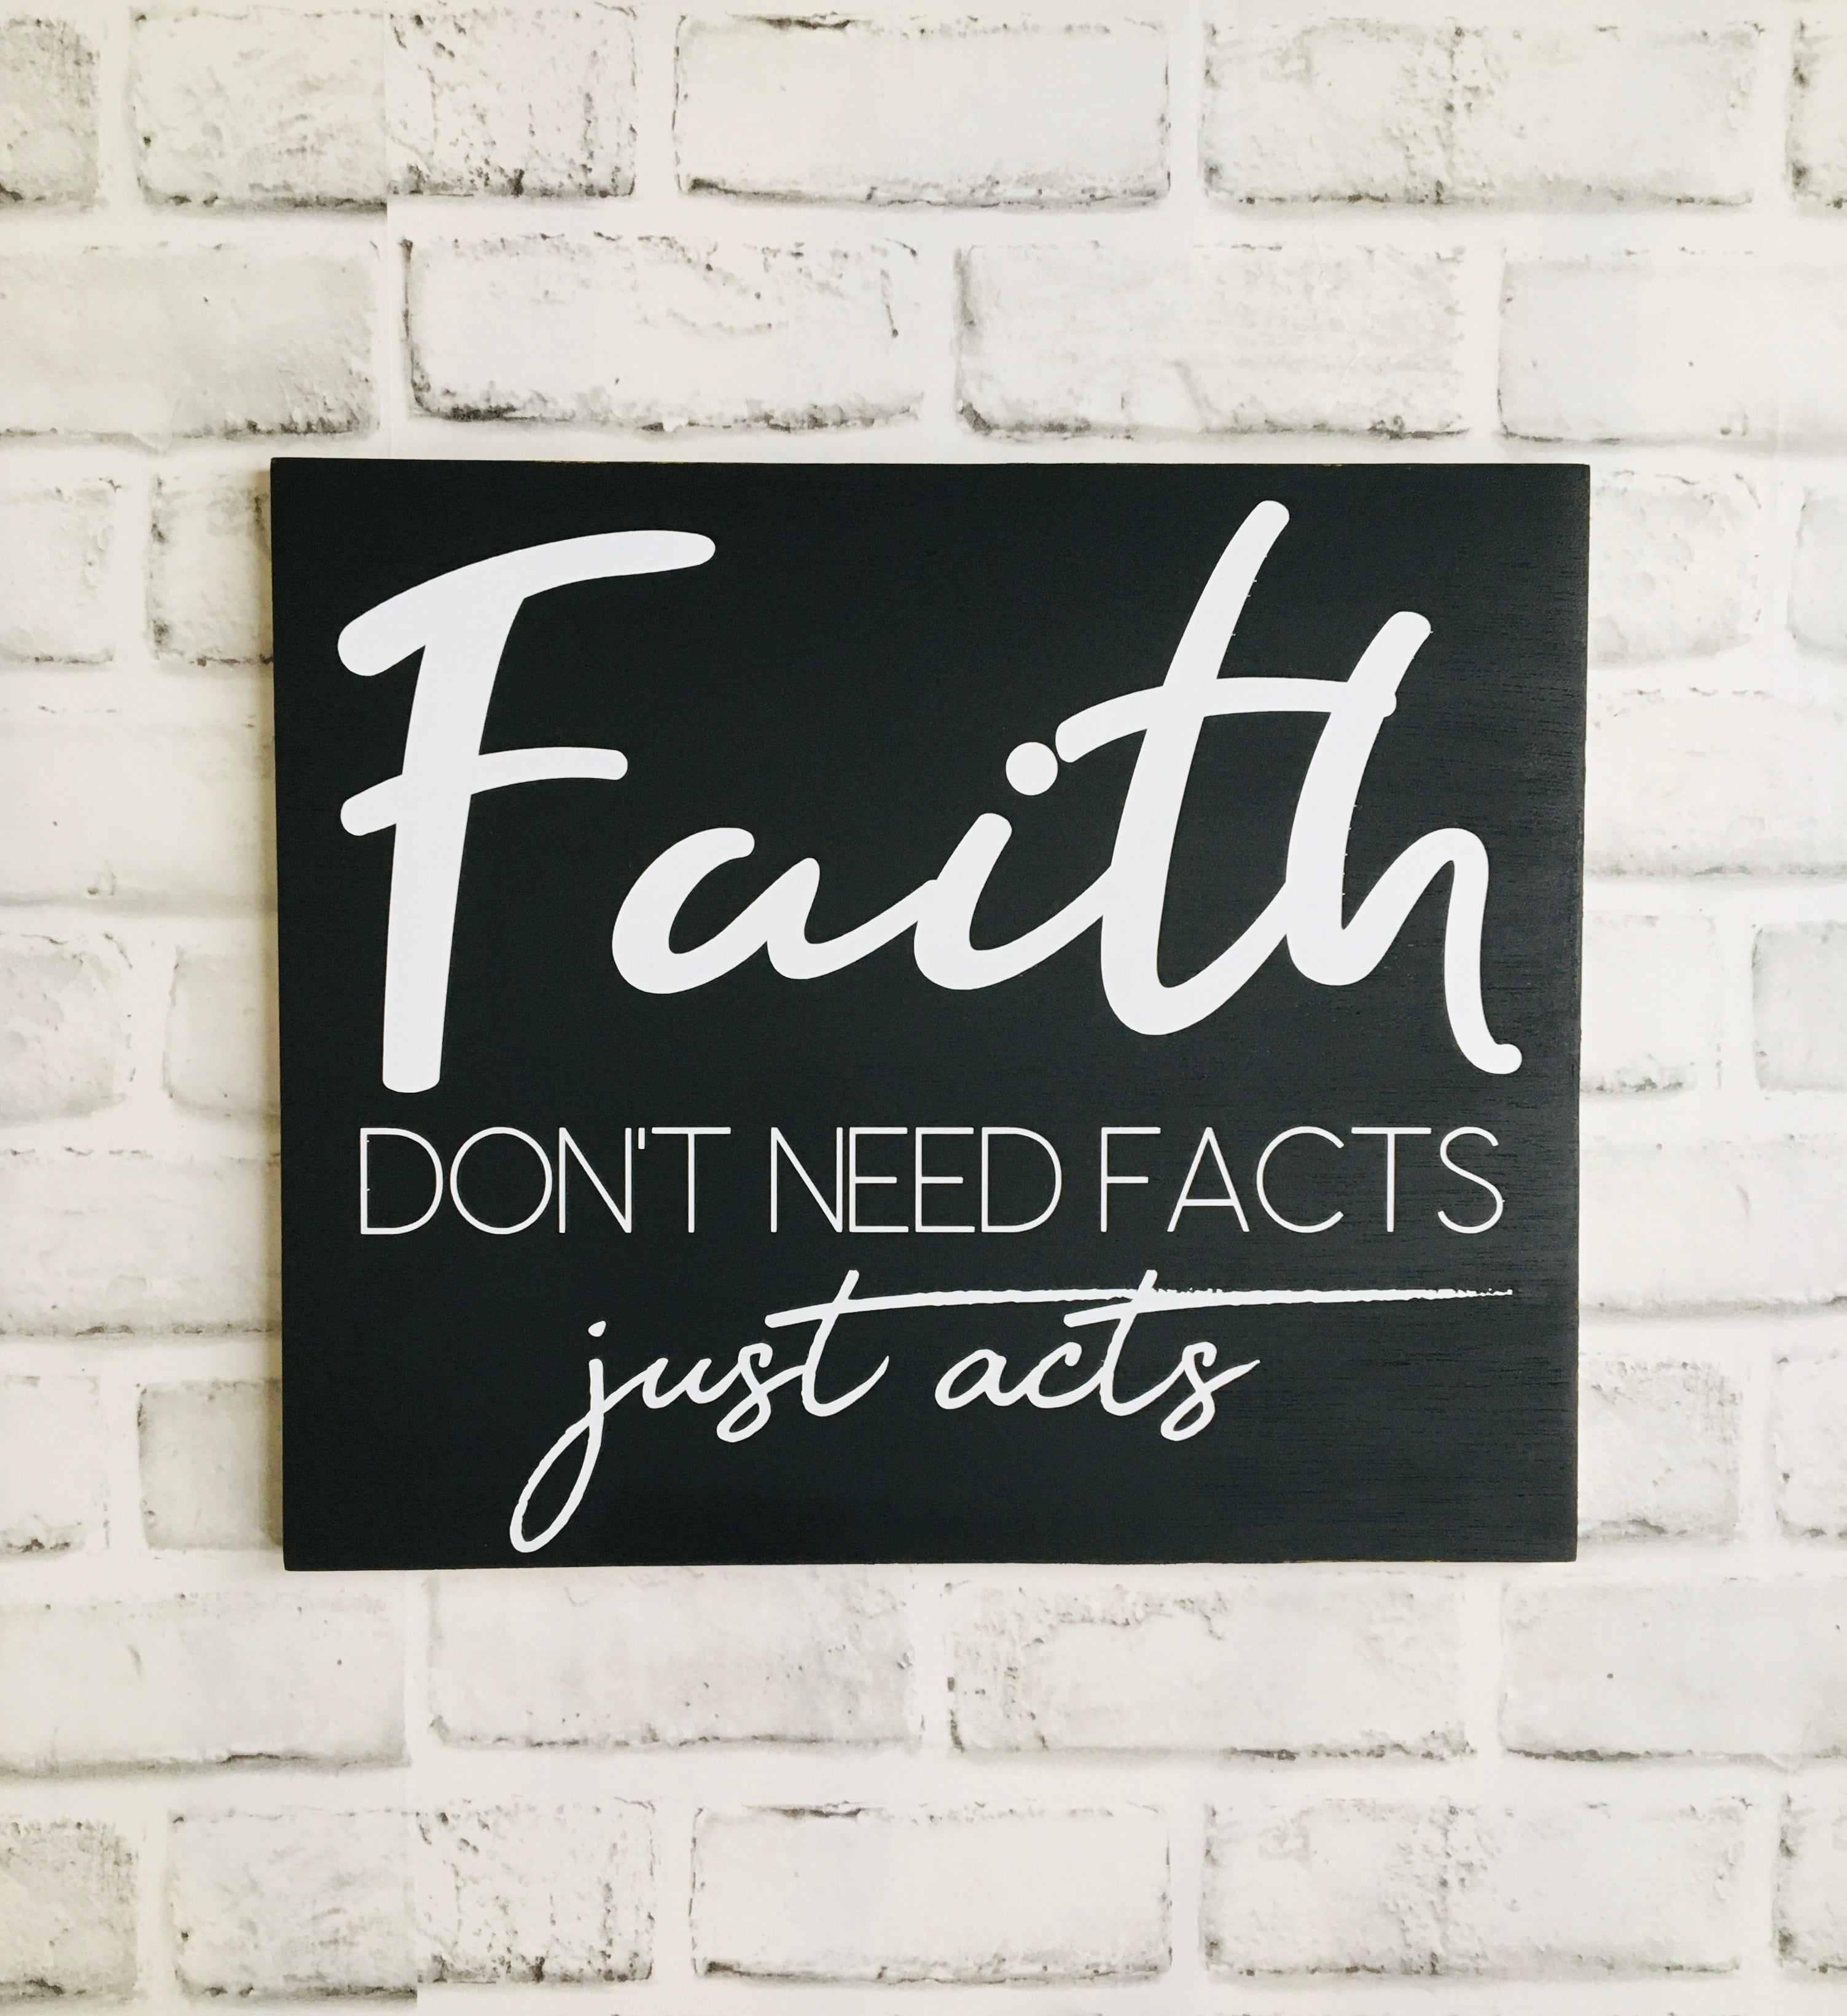 Faith Without Works Scripture Wall Decor, Christian Wall Decor, James 2:14 Scripture Sign, Wood Sign for Home